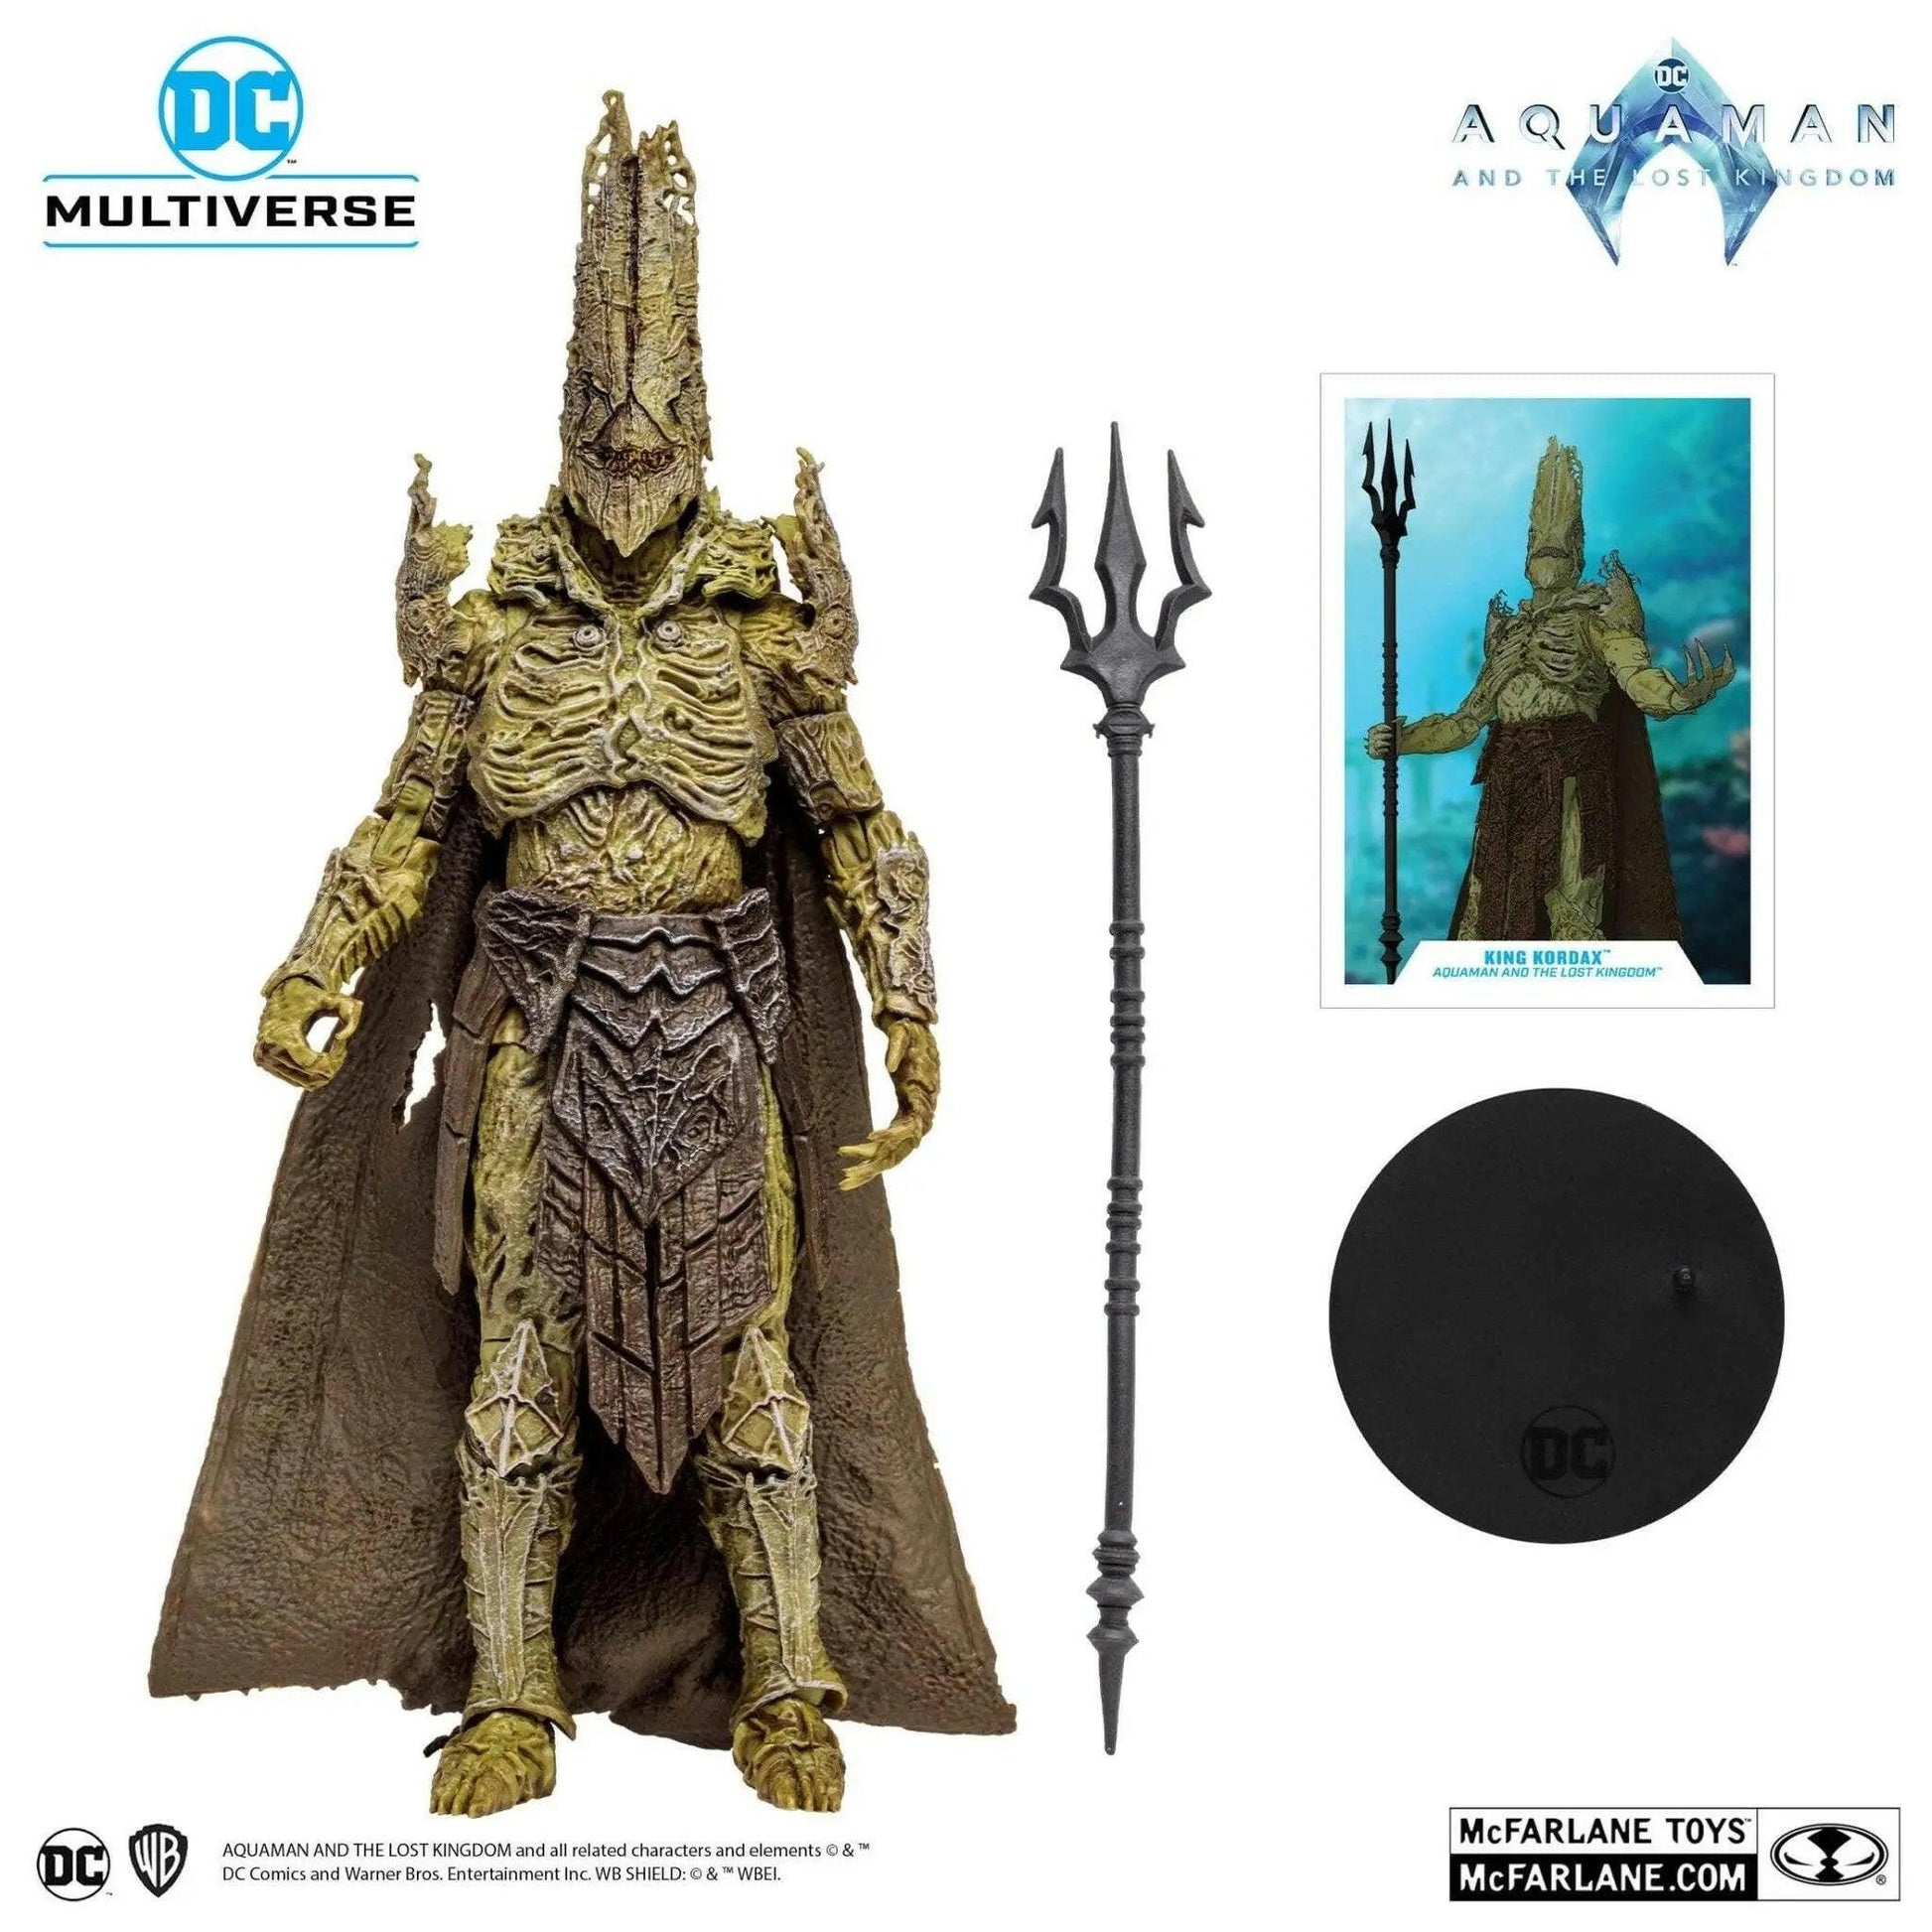 McFarlane DC Multiverse Aquaman and the Lost Kingdom Actionfigur King Kordax 18cm - Toy-Storage